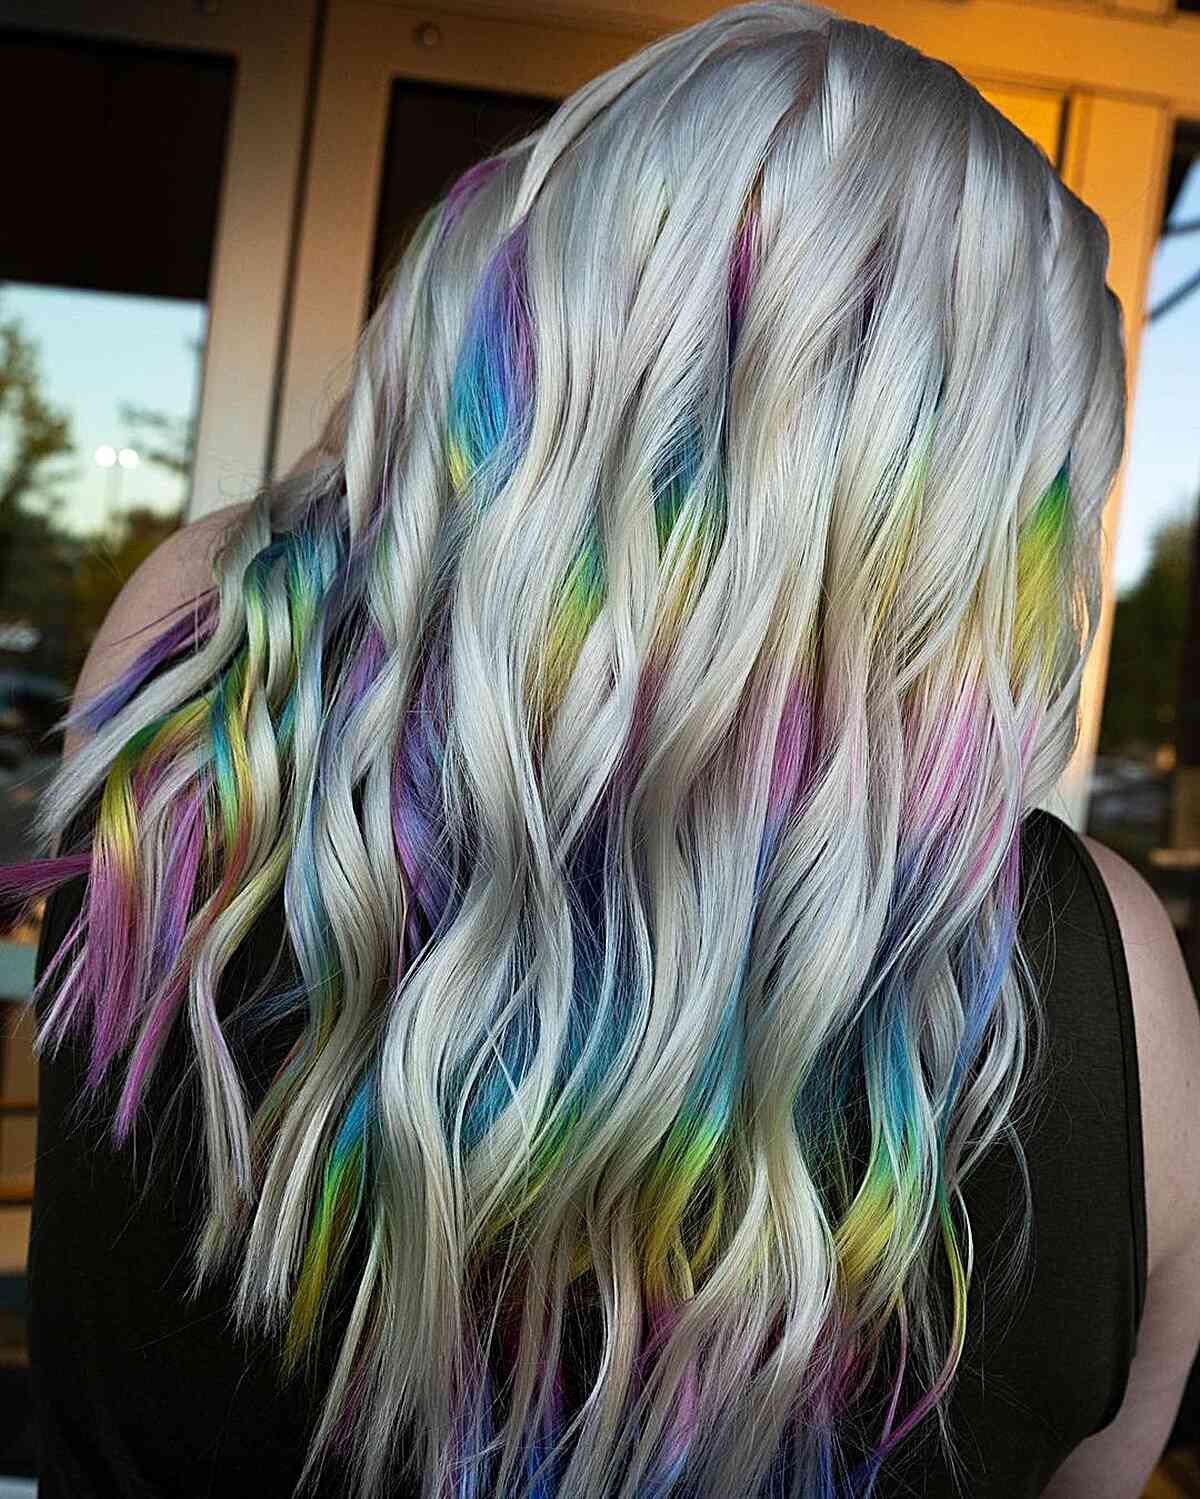 Bleached and Rainbowed Hair for women with an edgy style and textured hair